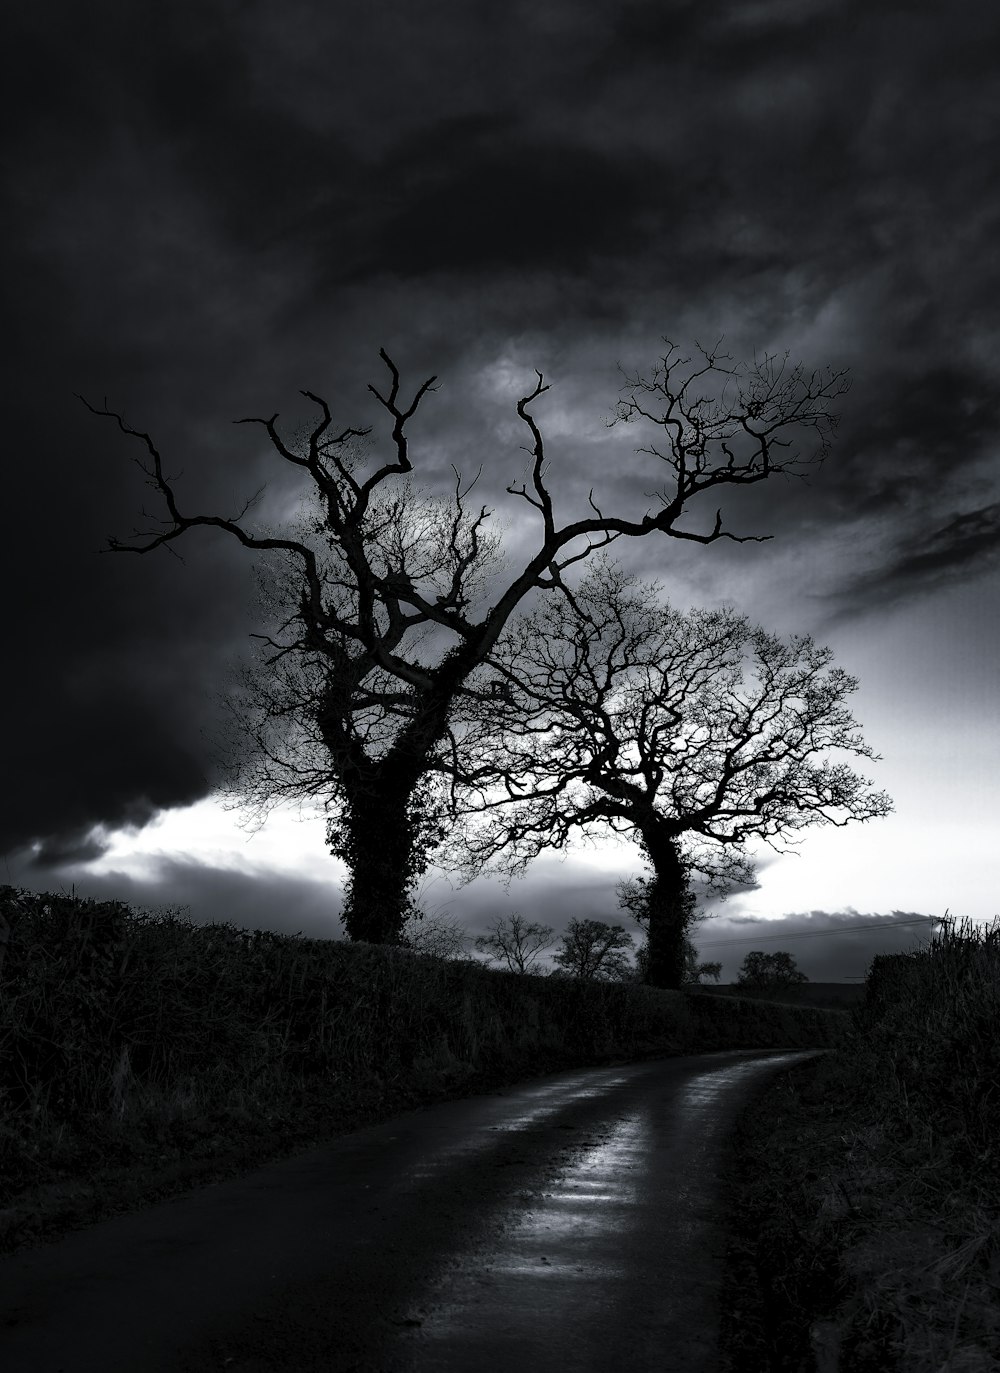 two trees in the middle of a road under a cloudy sky